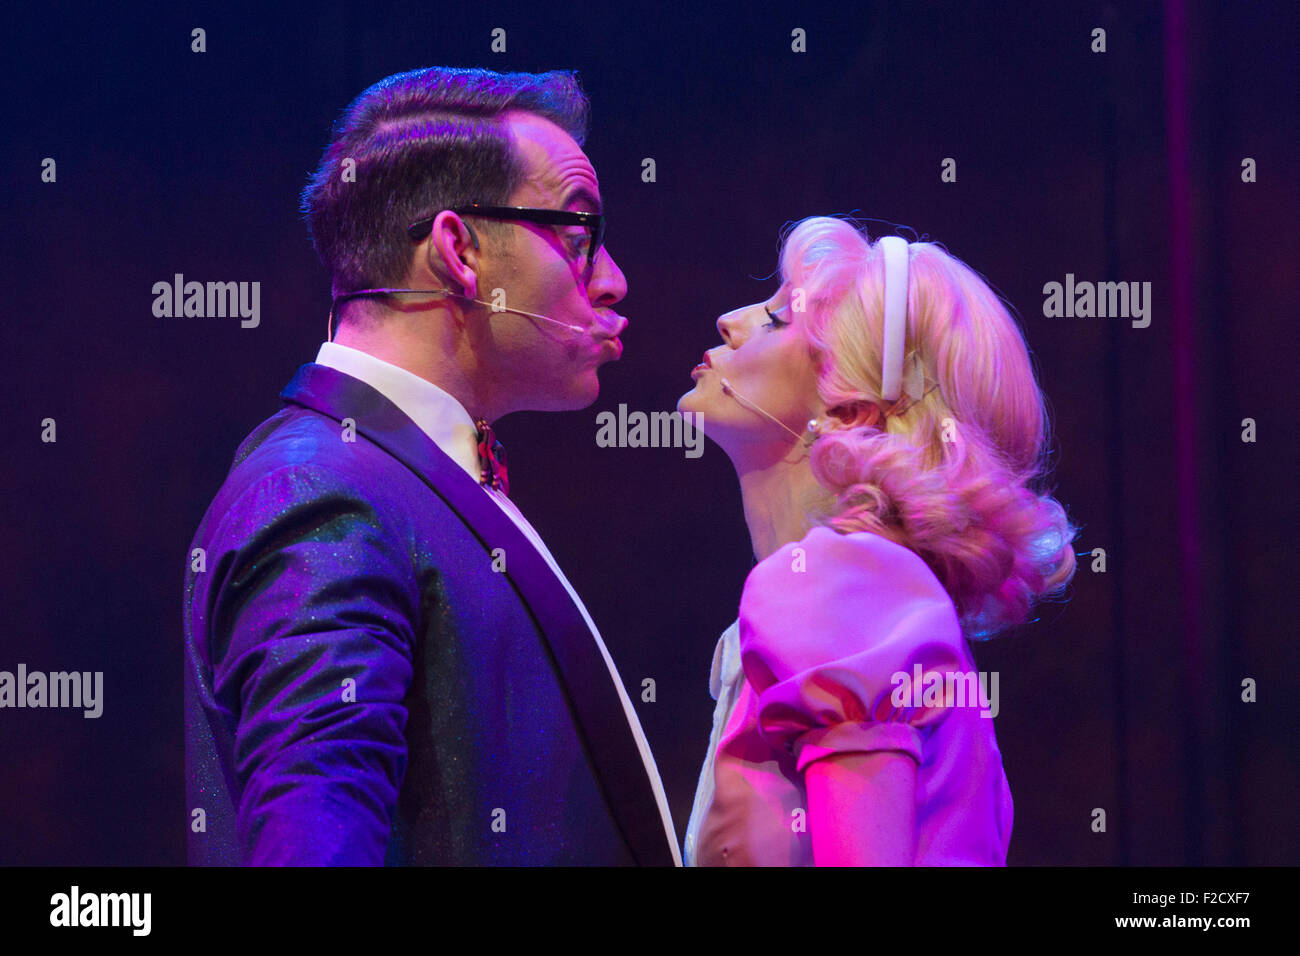 London, UK. 15 September 2015. Pictured: Ben Forster as Brad and Helen Flaherty as Janet. The Rocky Horror Show, written and starring Richard O'Brien, returns to the West End for a limited run at the Playhouse theatre from 11 September 2015. The Rocky Horror Show Gala Performance on 17 September will be broadcast live to cinemas across the UK and Europe. With Richard O'Brien as Narrator, David Bedella as Frank'n'furter, Ben Forster as Brad, Haley Flaherty as Janet and Dominic Andersen as Rocky. Photo: Bettina Strenske Stock Photo